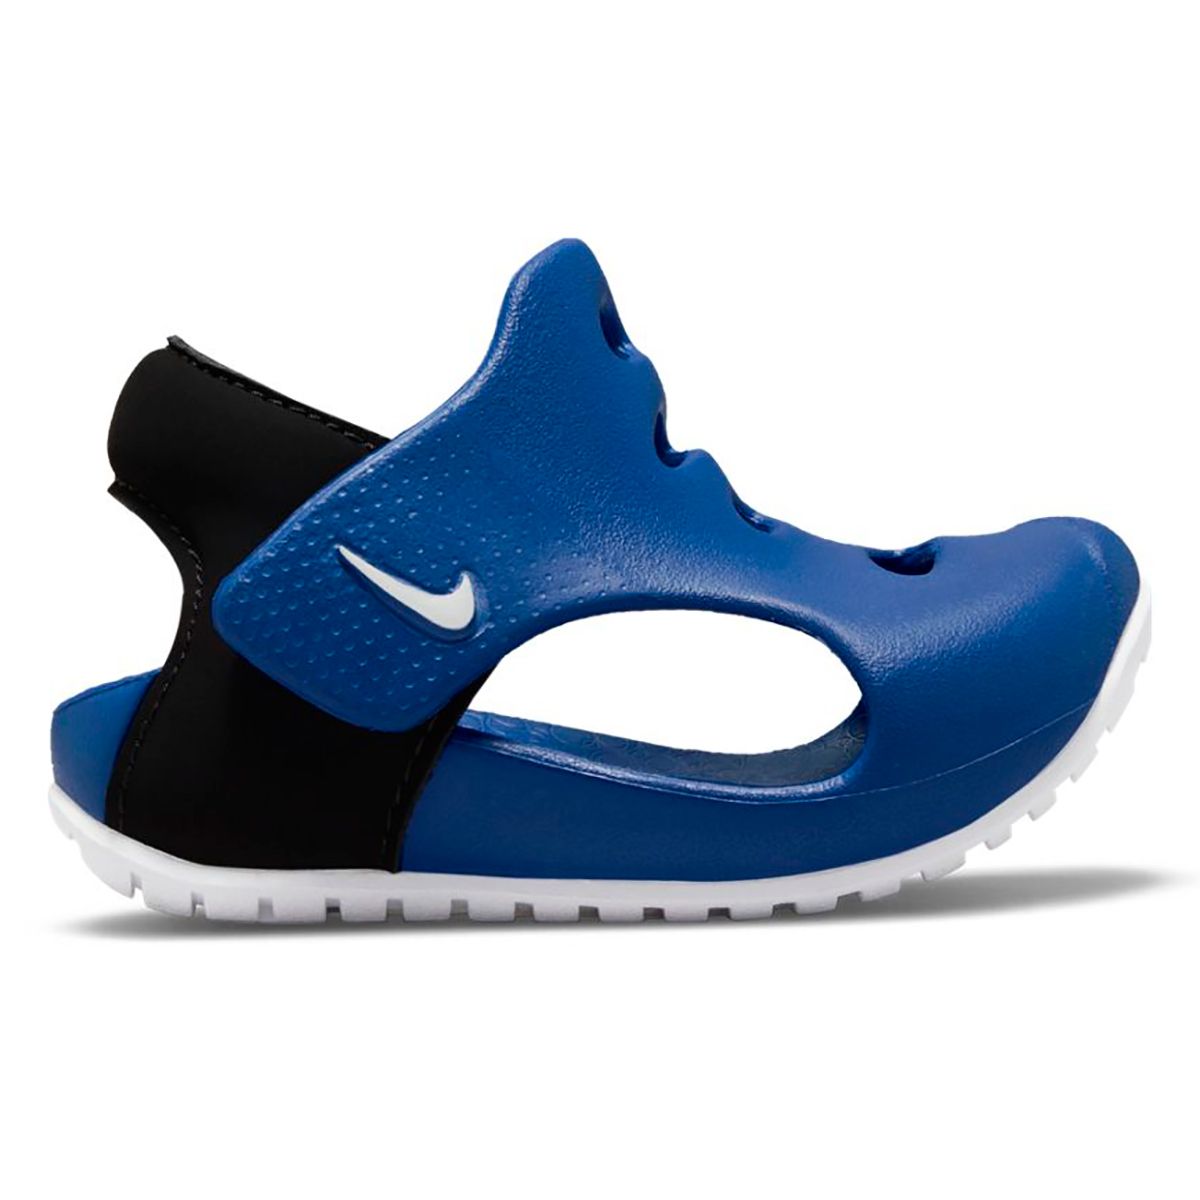 Toddler Sunray 3 Nike Protect Sandals DH9465-400